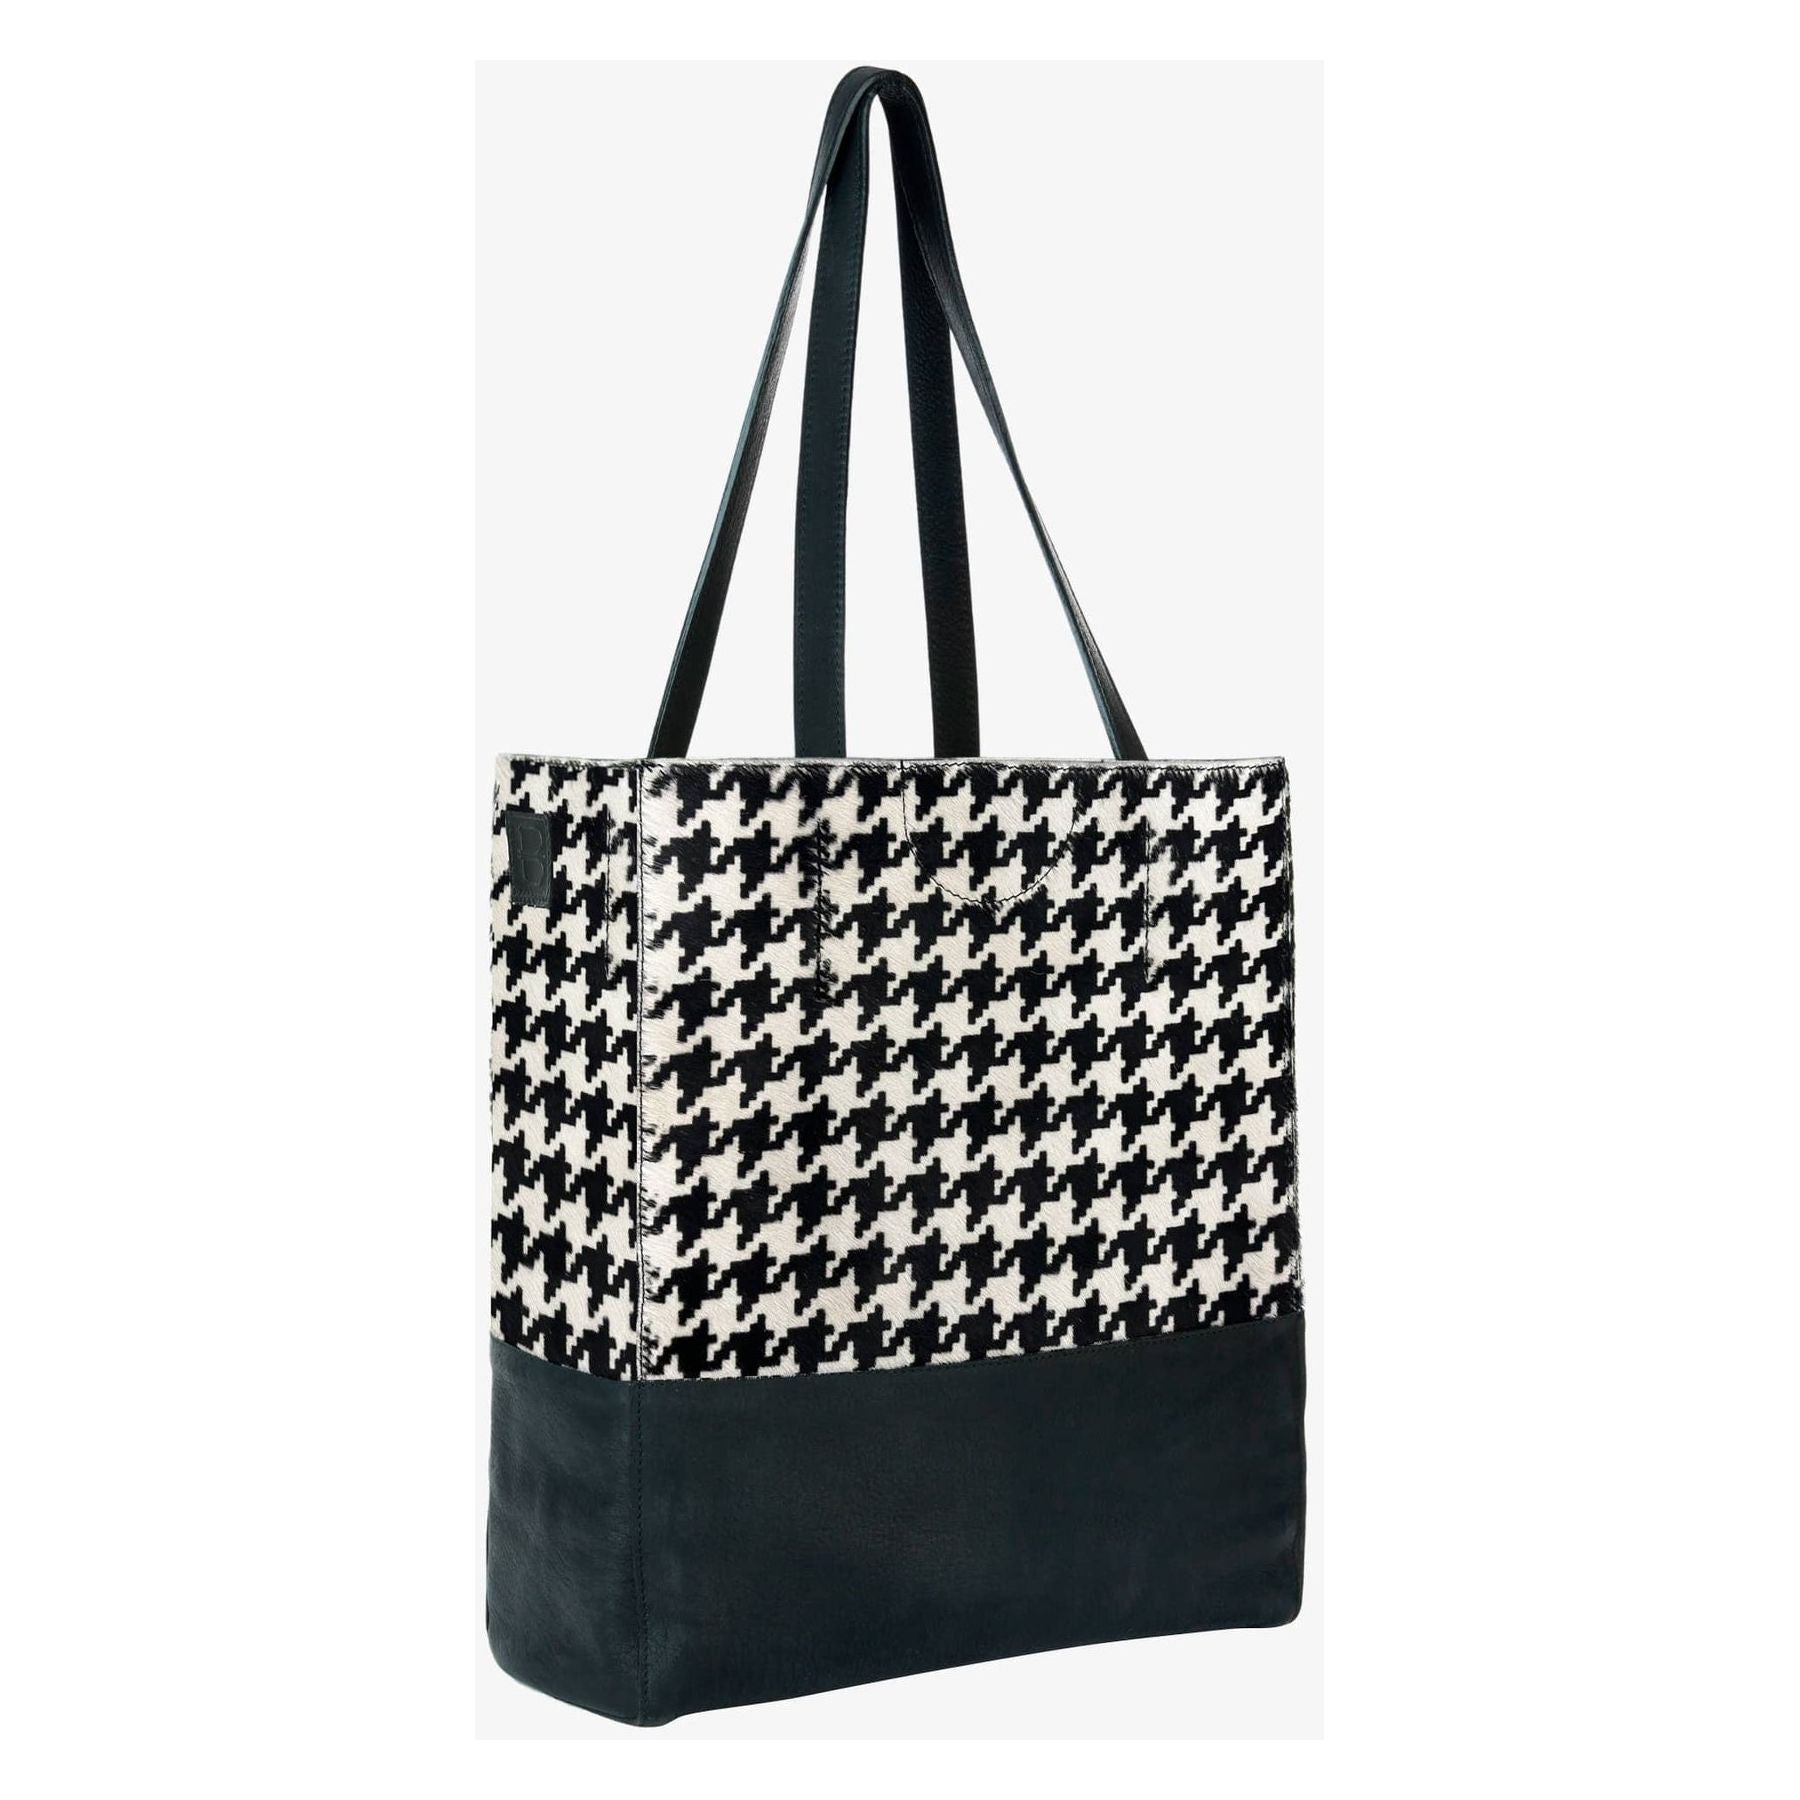 Brave - Saloso Tote in Houndstooth